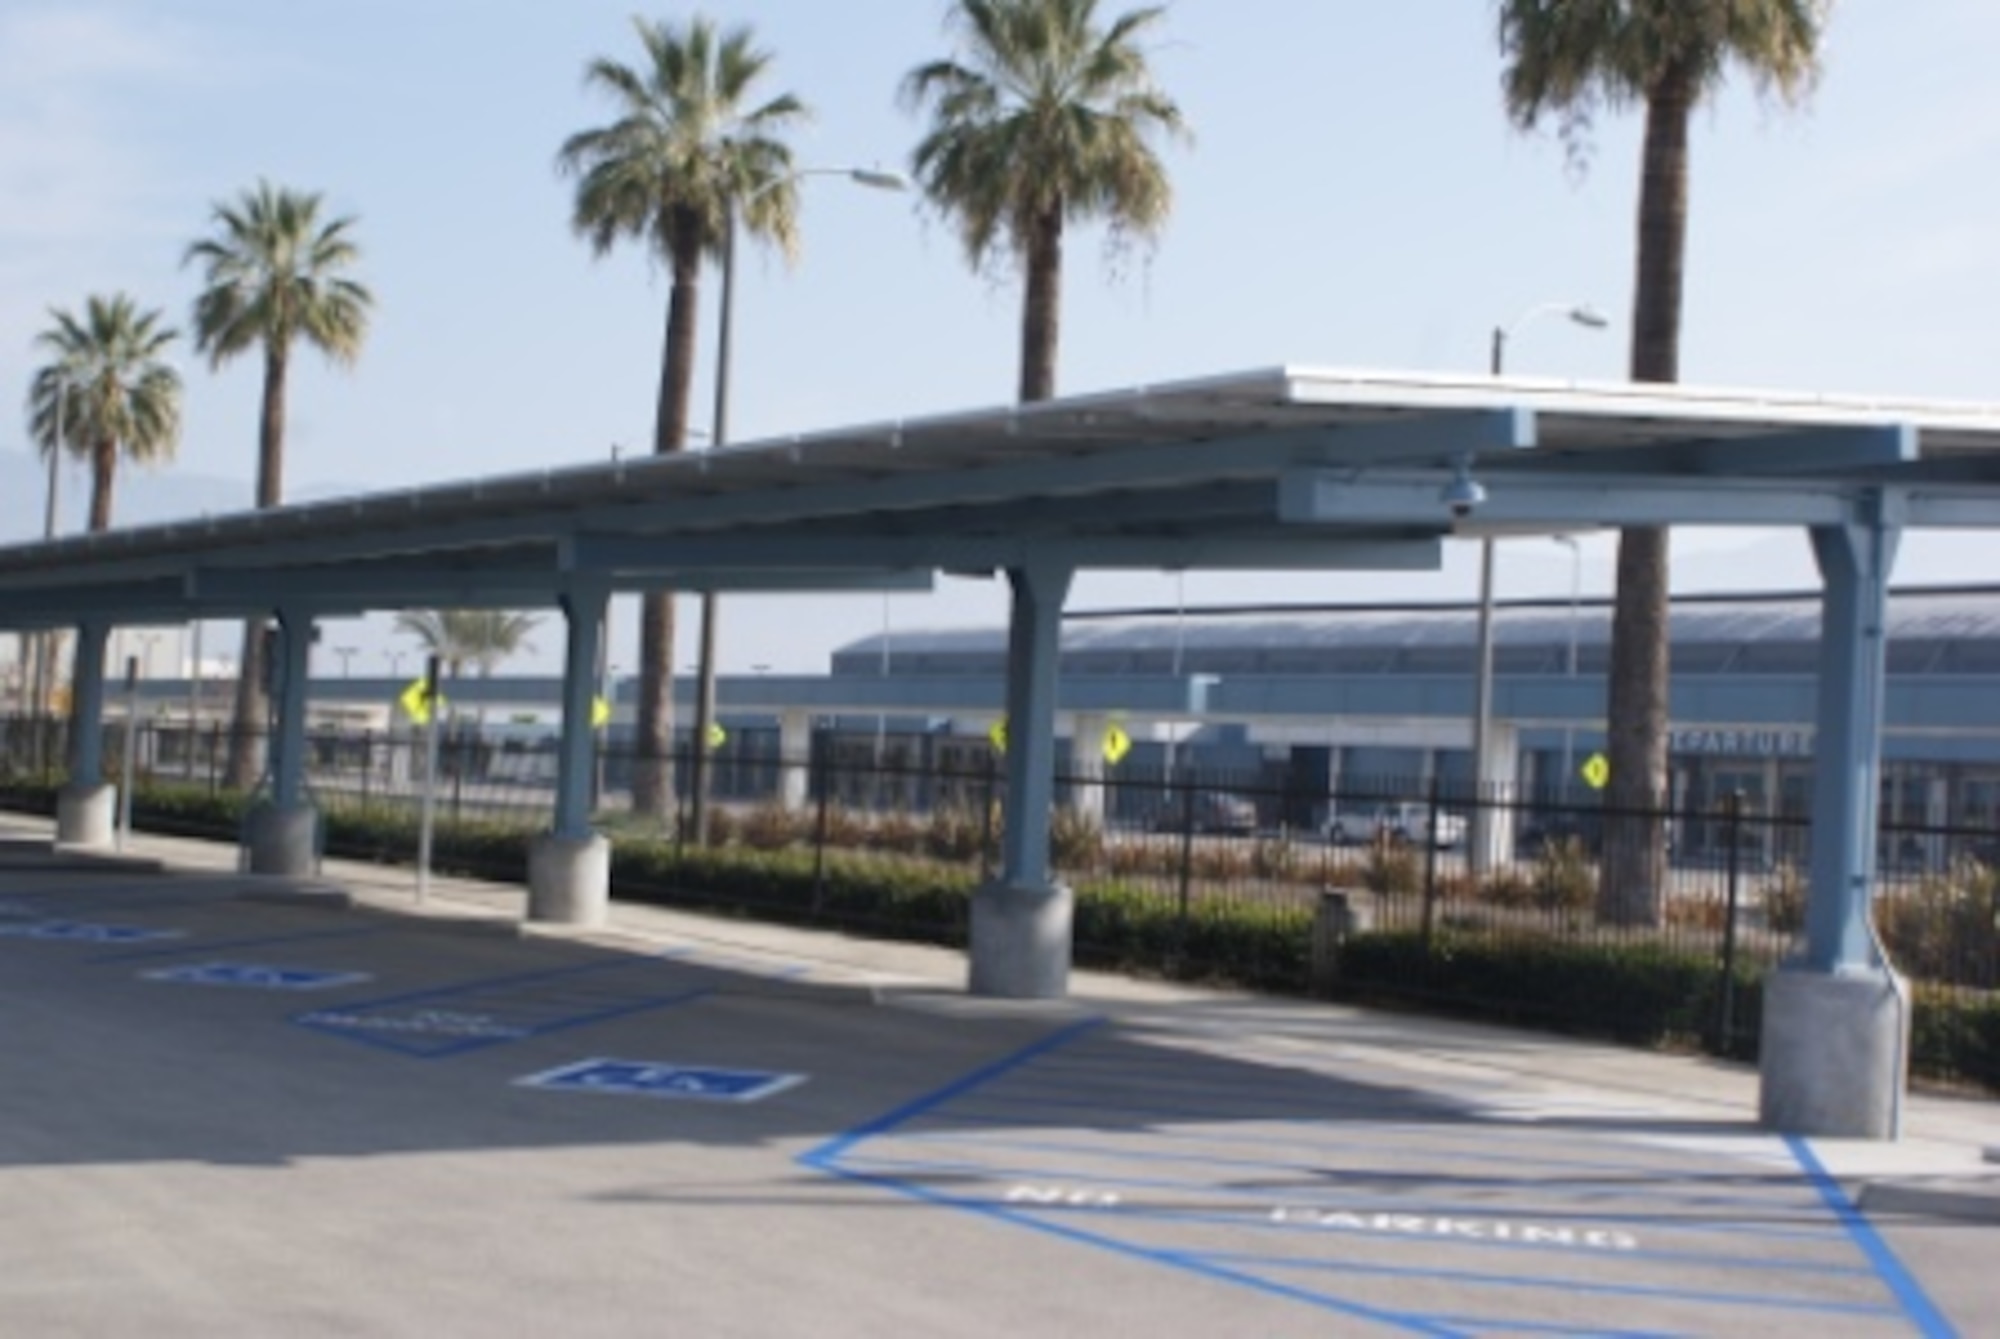 A parking lot at the former Norton AFB is going solar, thanks to a $2.8 million project to shade the San Bernardino International Airport's parking lot. [Photos courtesy of Inland Valley Development Agency]
